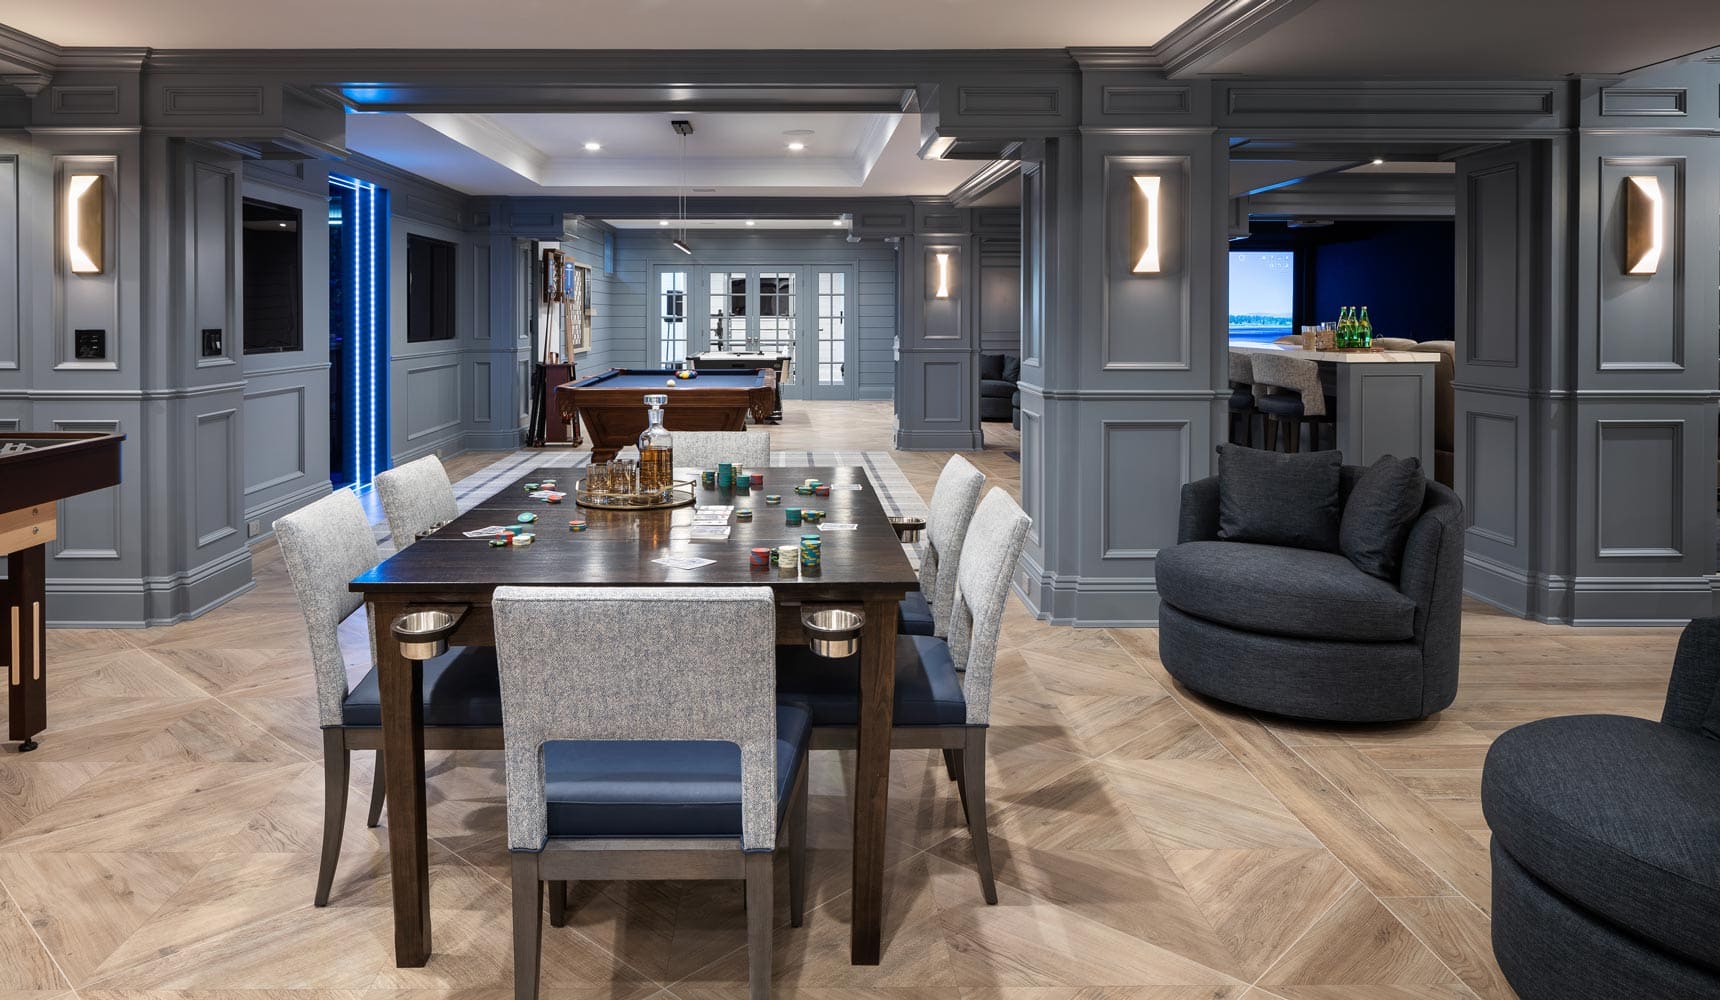 Sands Point basement game room designed by Annette Jaffe Interiors